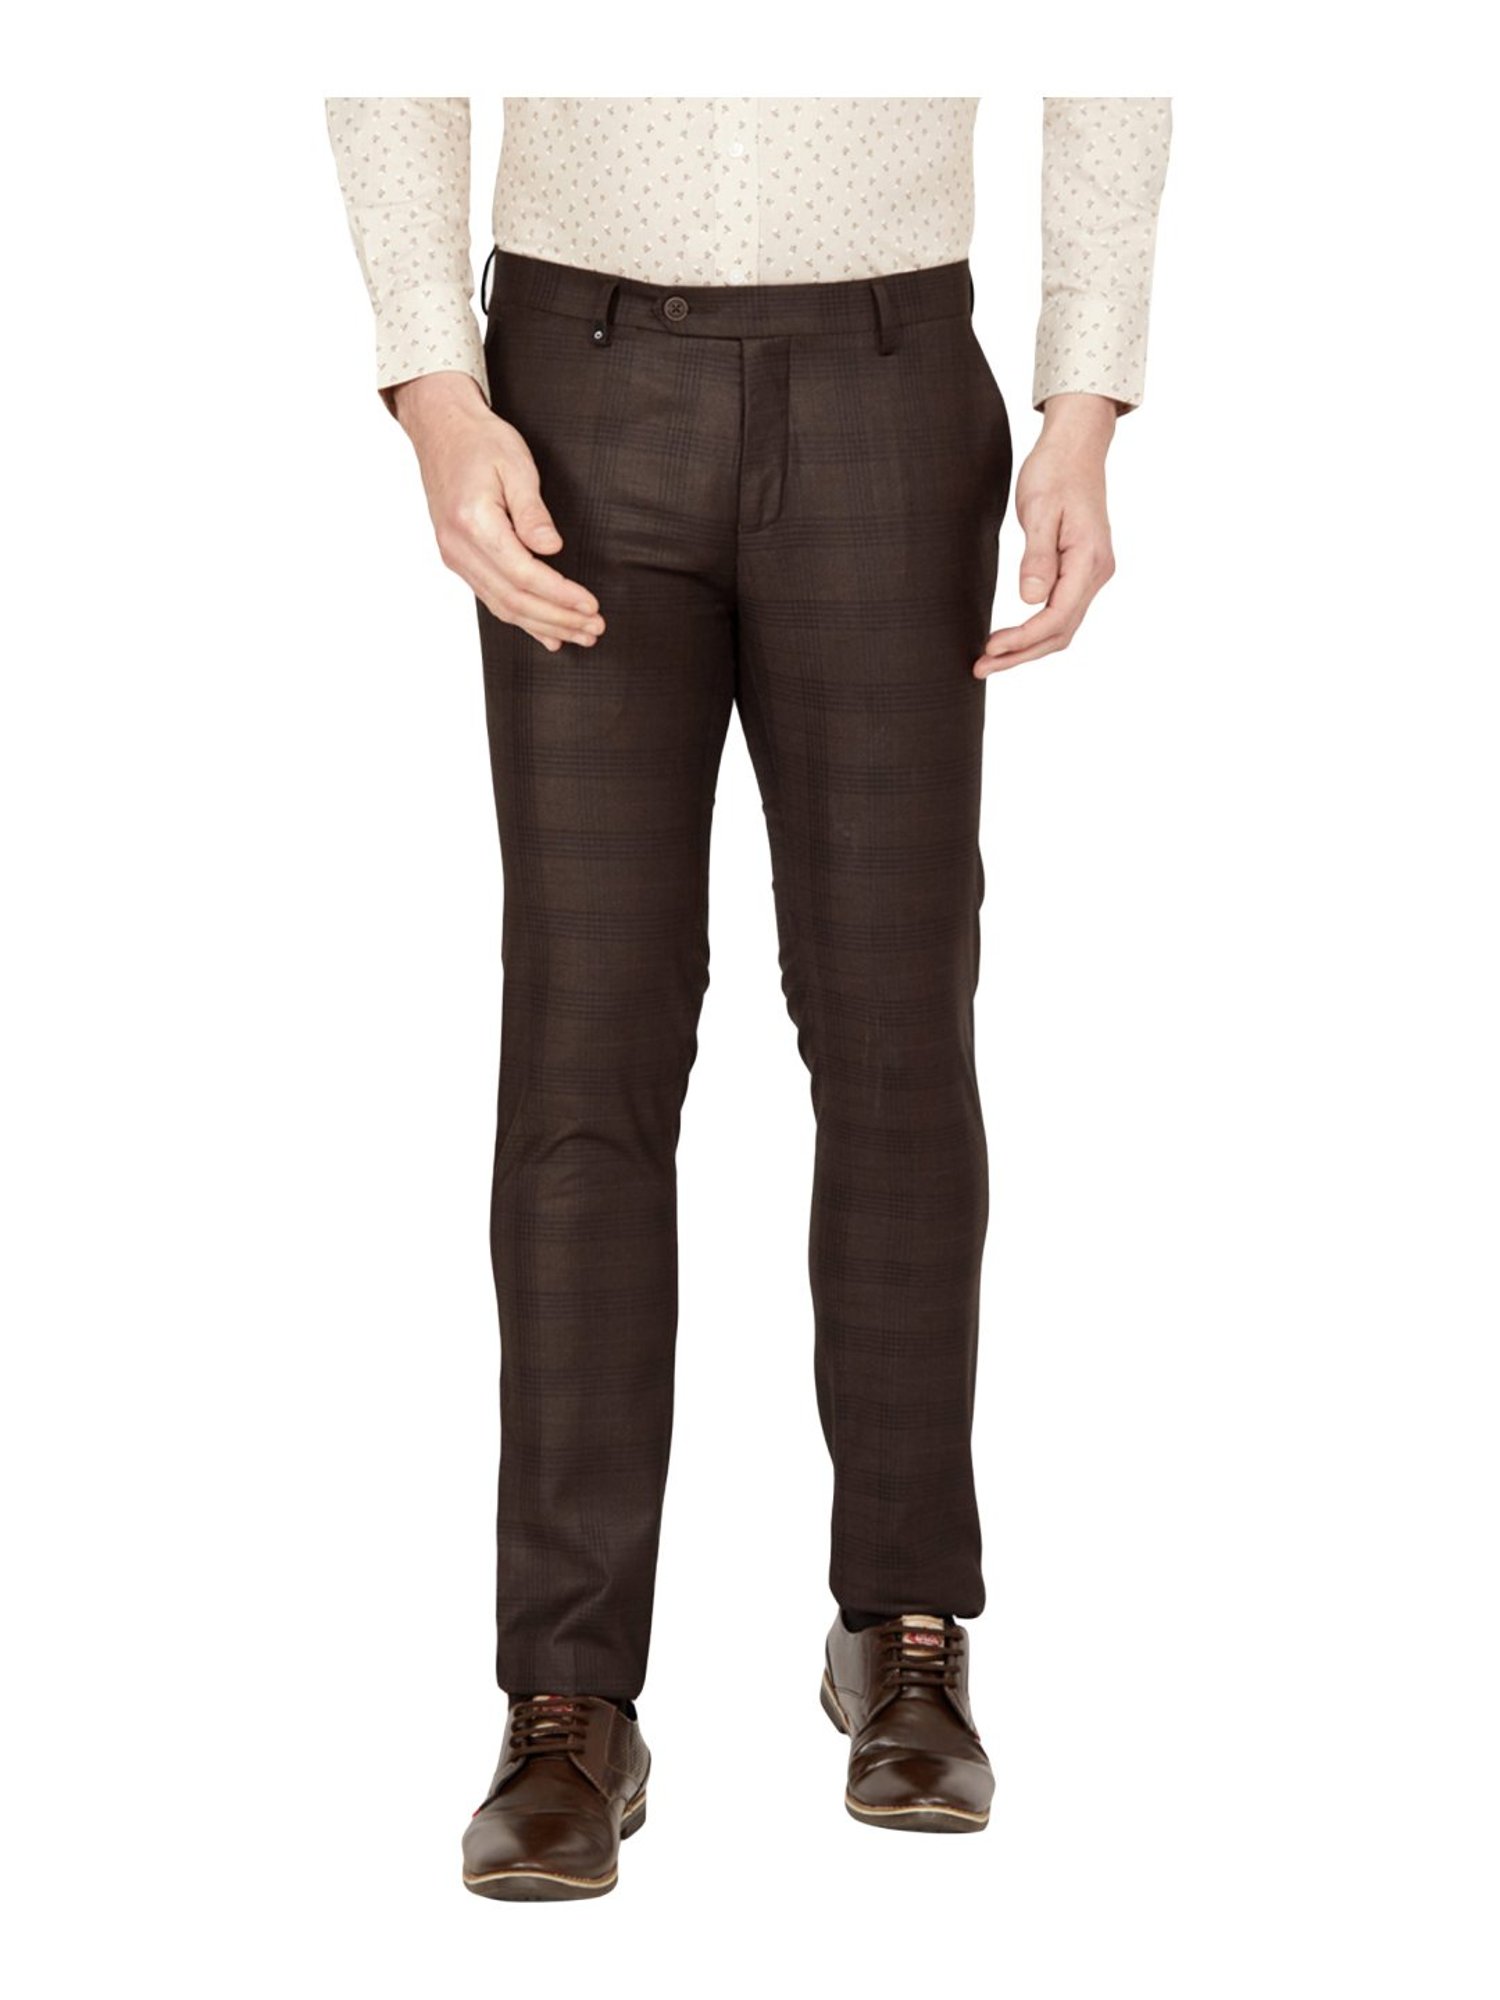 Buy Navy Blue Trousers & Pants for Men by OXEMBERG Online | Ajio.com